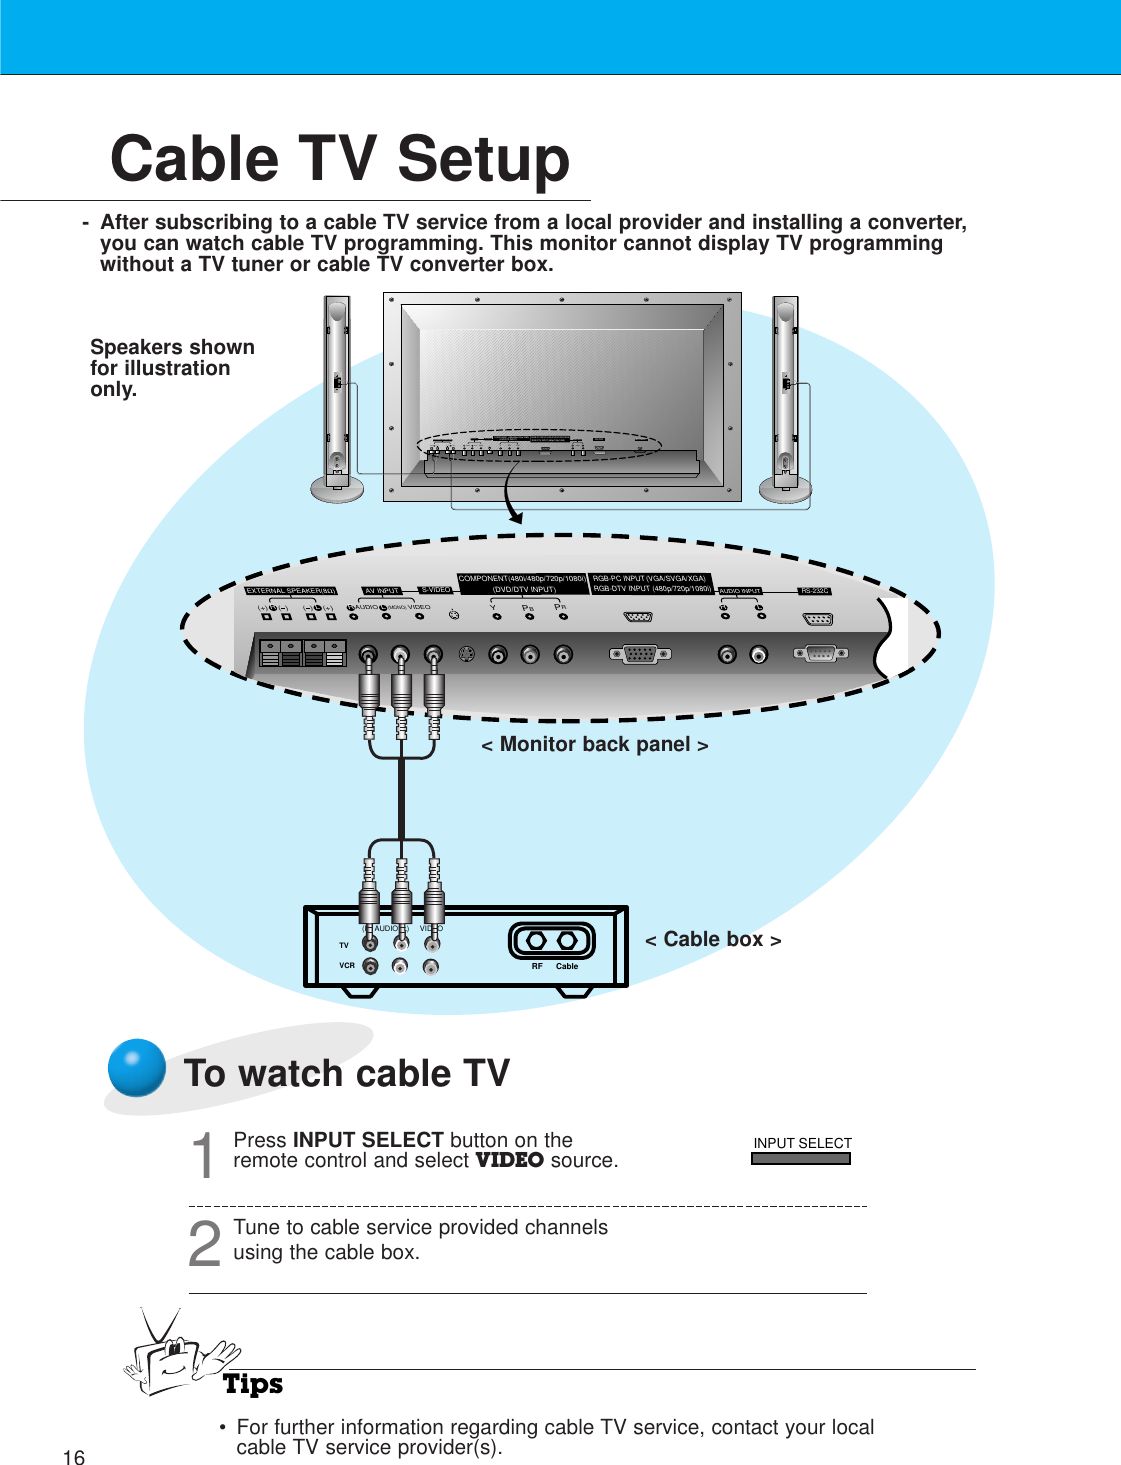 16Cable TV Setup- After subscribing to a cable TV service from a local provider and installing a converter,you can watch cable TV programming. This monitor cannot display TV programmingwithout a TV tuner or cable TV converter box.TVVCR RF Cable (R) AUDIO (L) VIDEOY(+) (  ) (+)(  )EXTERNAL SPEAKER(8Ω)R L RAUDIO VIDEO(MONO)LP PCOMPONENT(480i/480p/720p/1080i)(DVD/DTV INPUT)BRRGB-DTV INPUTRGB-PC INPUT (VGA/SVGA/XGA)(480p/720p/1080i)PY P(+) (  ) (+)(  )AC INPUTBREXTERNAL SPEAKER (8Ω)RLAV INPUT S-VIDEOAUDIO(MONO)R L VIDEOCOMPONENT (480i/480p/720p/1080i)(DVD/DTV INPUT) RGB-PC INPUT(VGA/SVGA/XGA/SXGA)RGB-DTV INPUT(480p/720p/1080i)AUDIOR LAUDIO INPUTAV INPUTR LAUDIO INPUTRS-232CRS-232CS-VIDEOTo watch cable TVPress INPUT SELECT button on theremote control and select VIDEO source.1Tune to cable service provided channelsusing the cable box.2Tips•For further information regarding cable TV service, contact your localcable TV service provider(s).&lt; Monitor back panel &gt;&lt; Cable box &gt;Speakers shownfor illustrationonly.INPUT SELECT